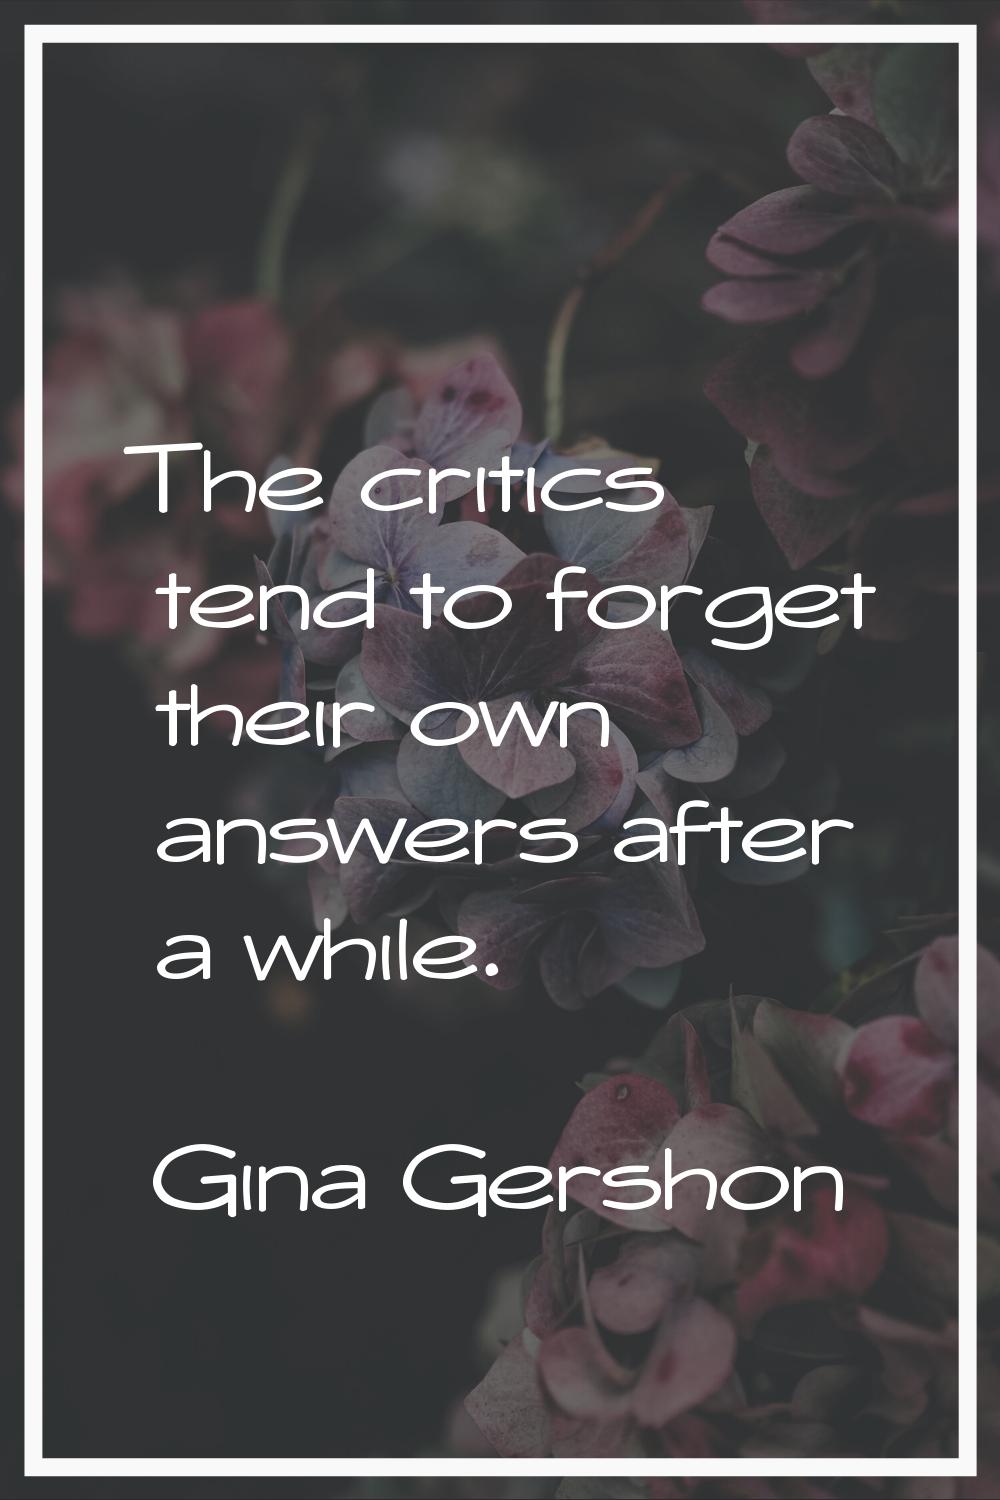 The critics tend to forget their own answers after a while.